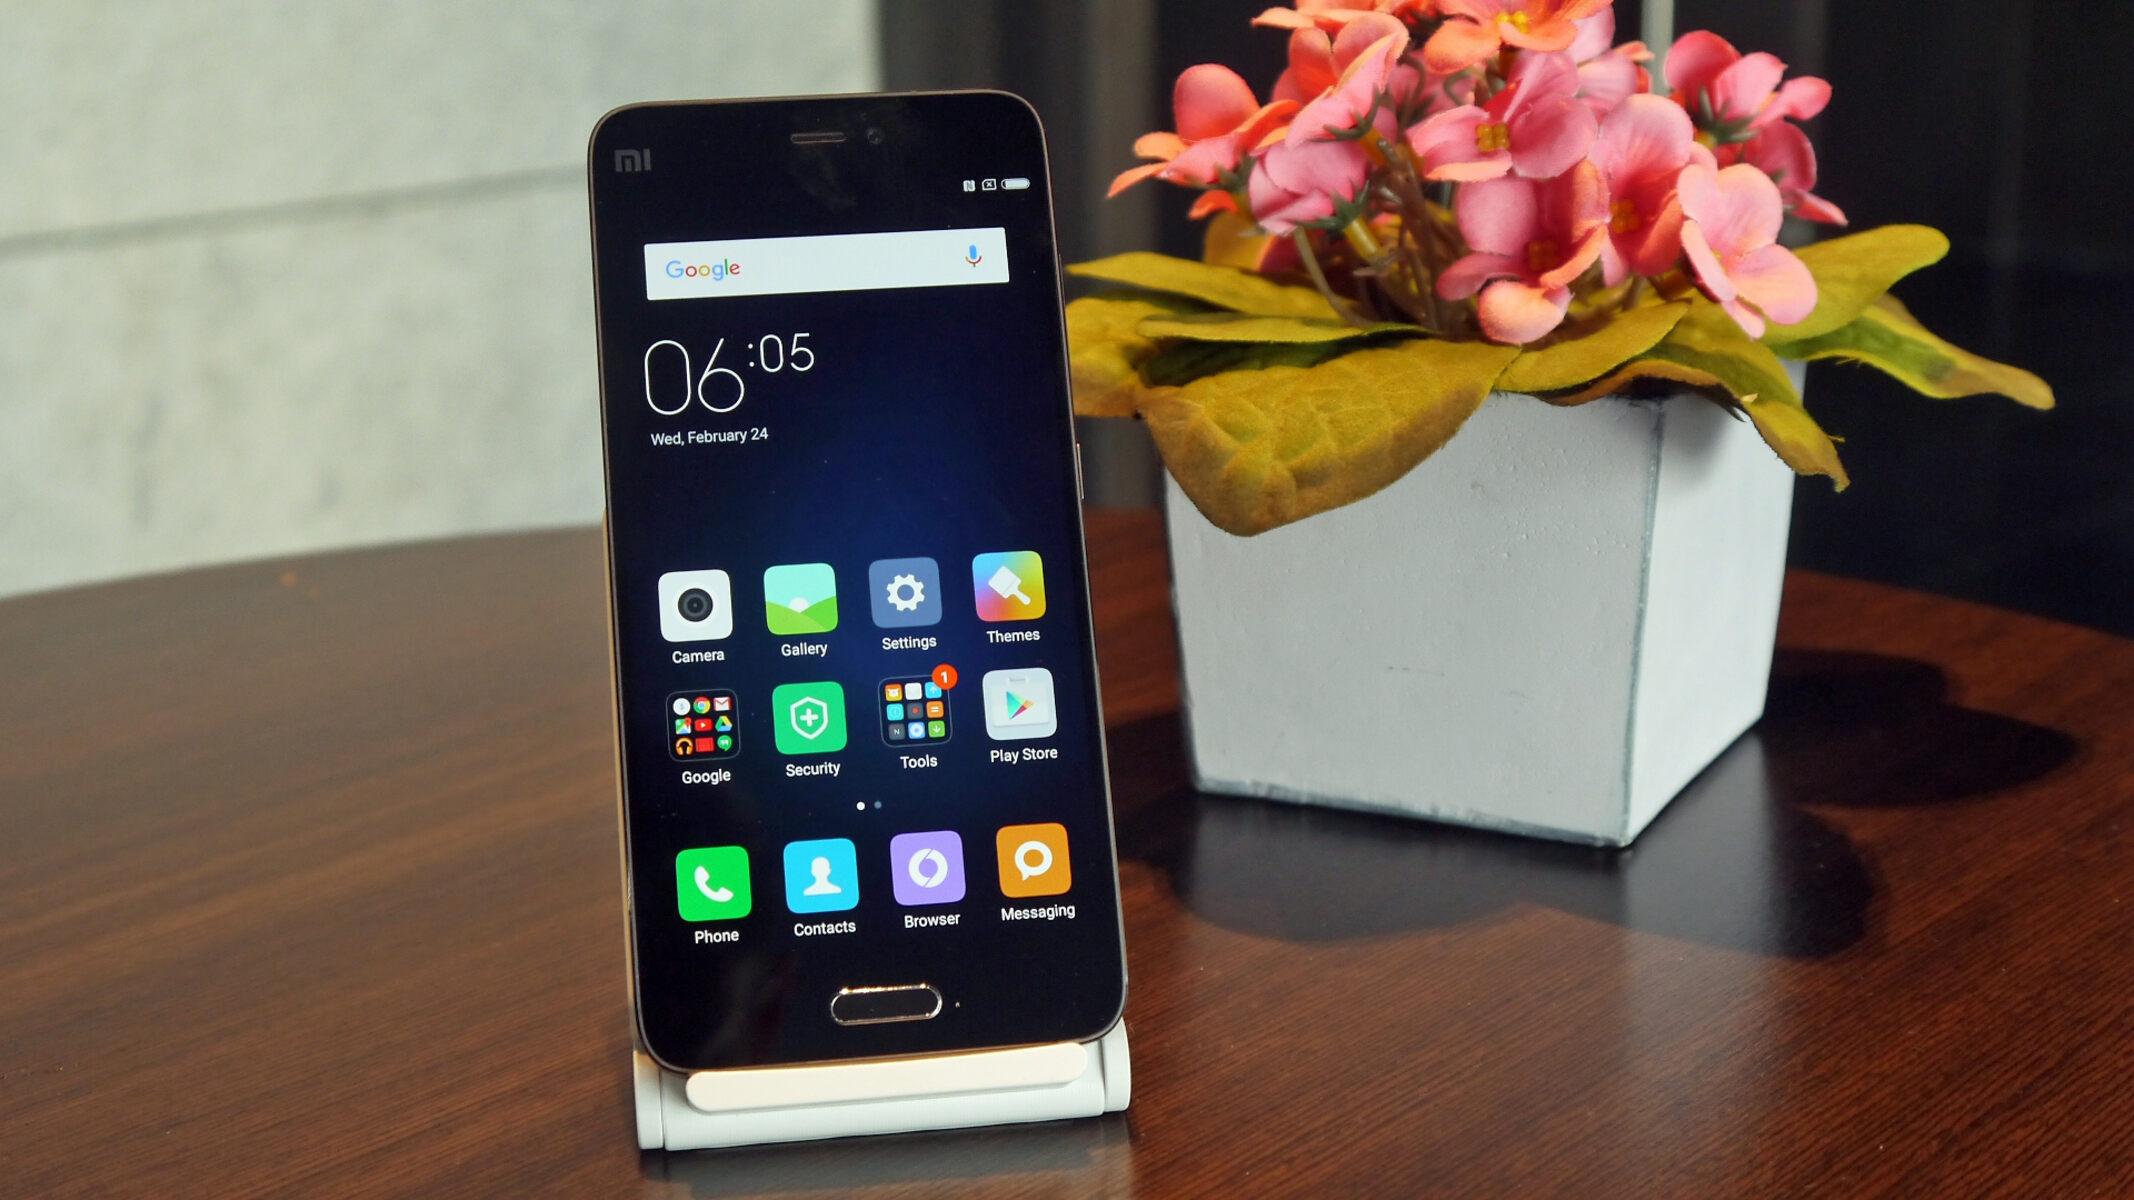 xiaomi-mi5-understanding-network-compatibility-for-seamless-use-in-canada